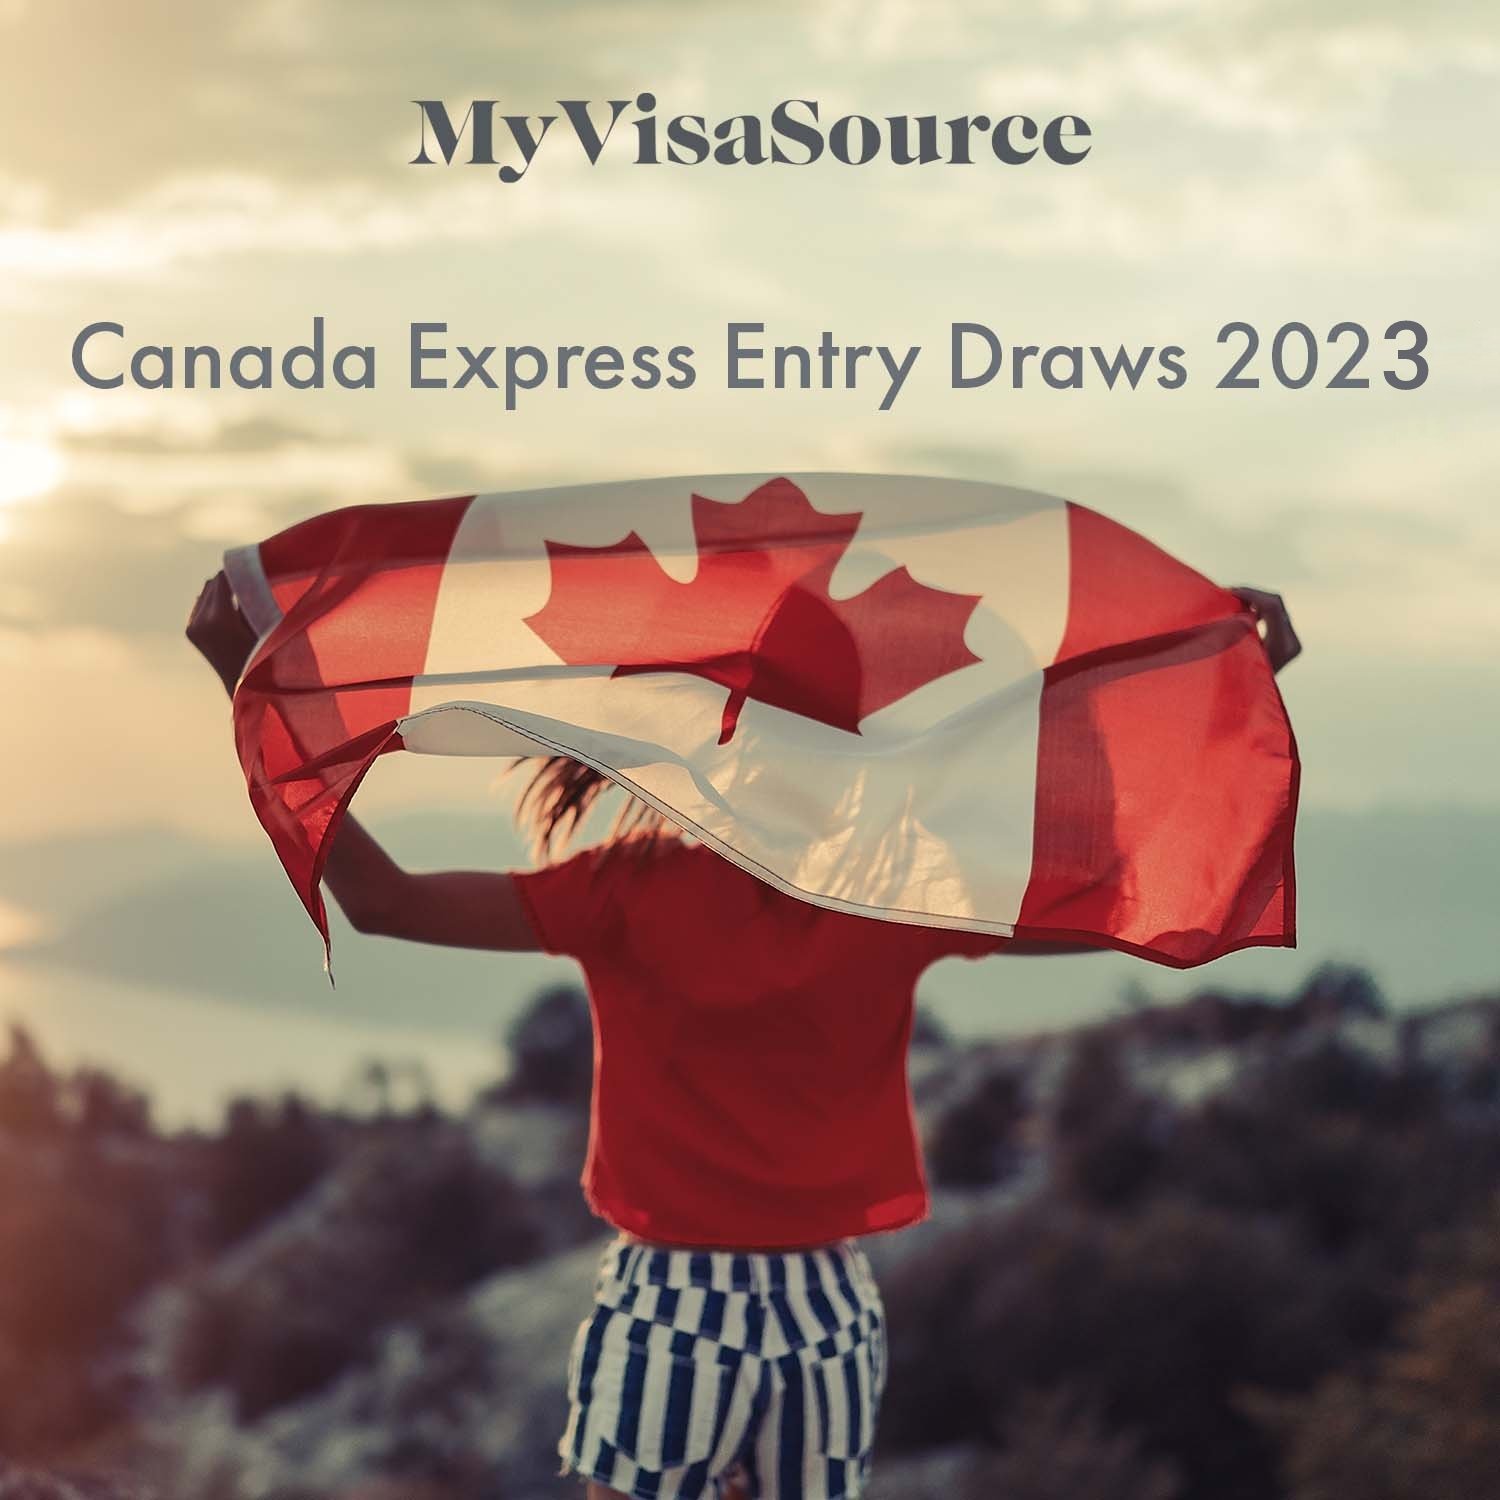 Express Entry Draw 2022 Results Out : 6 July 2022 Express Draw Results